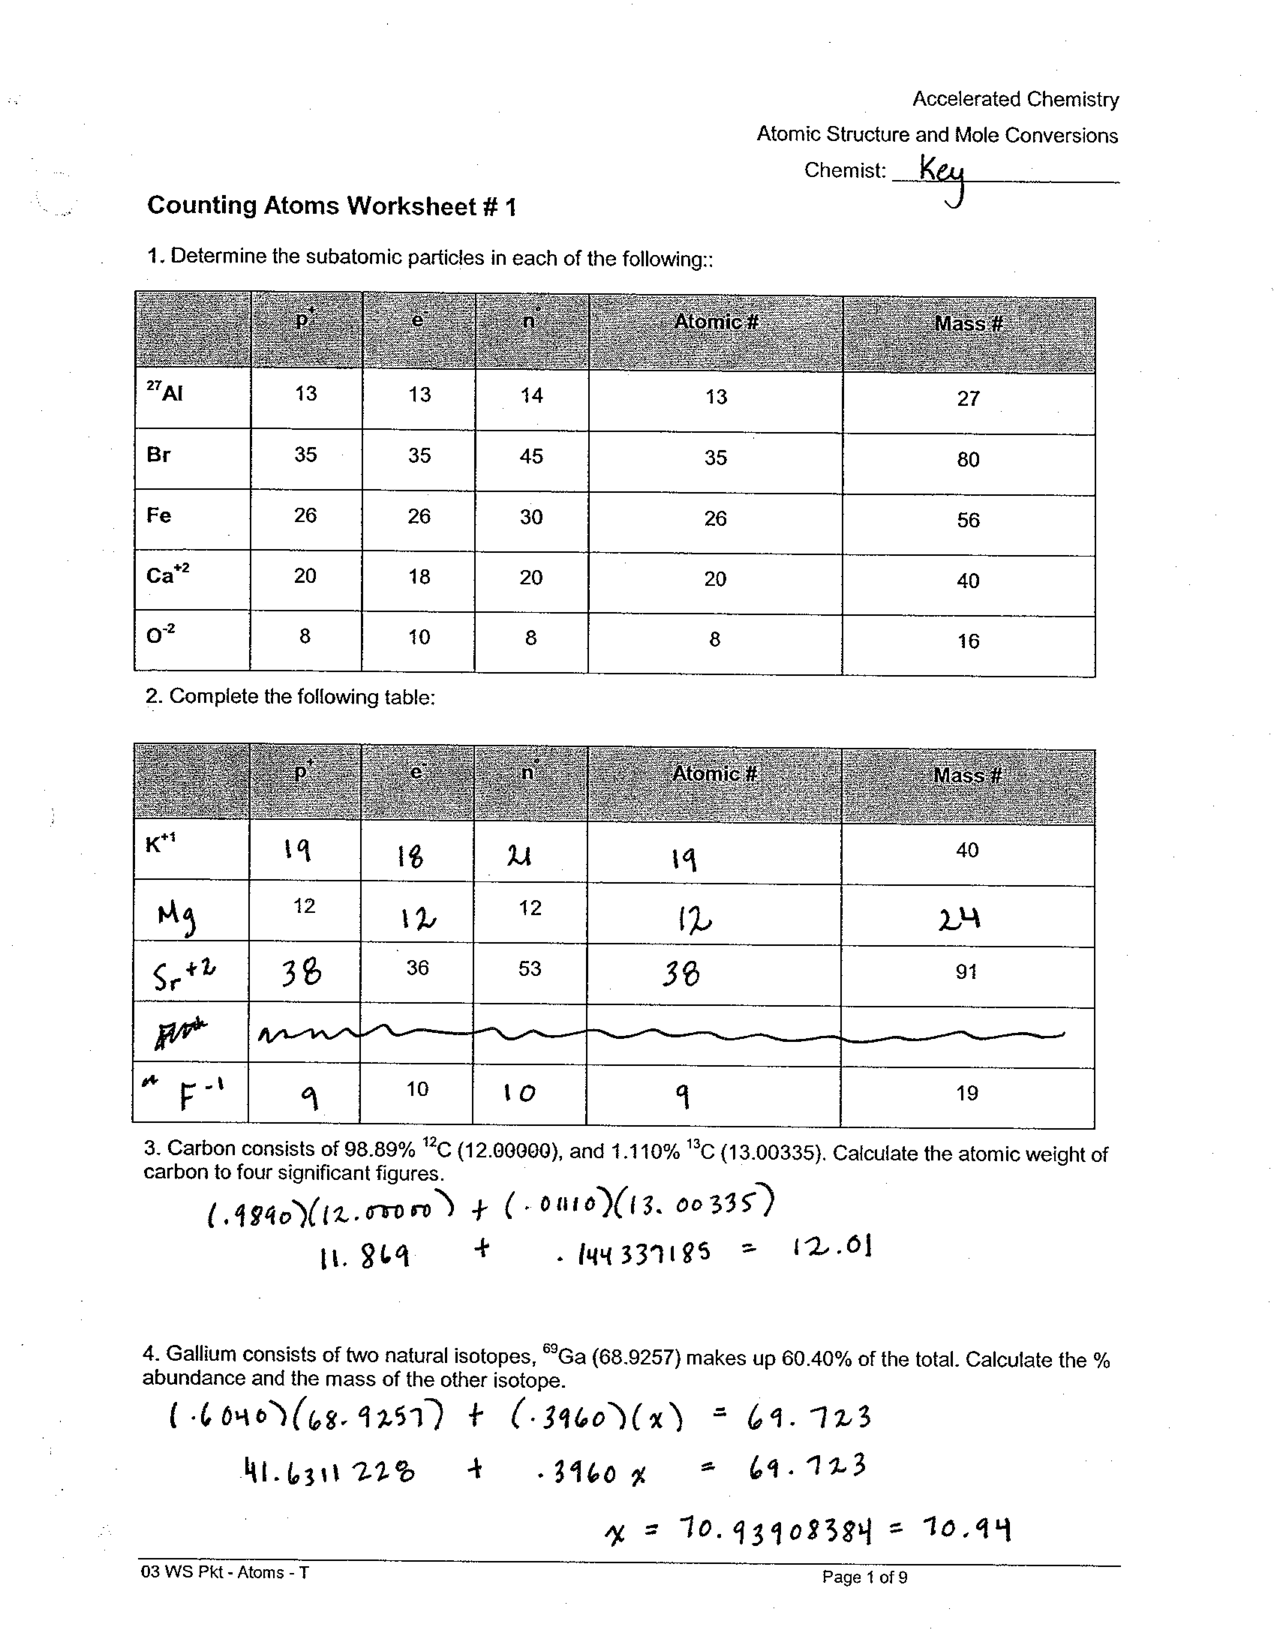 8th Grade Counting Atoms Worksheet Answer Key